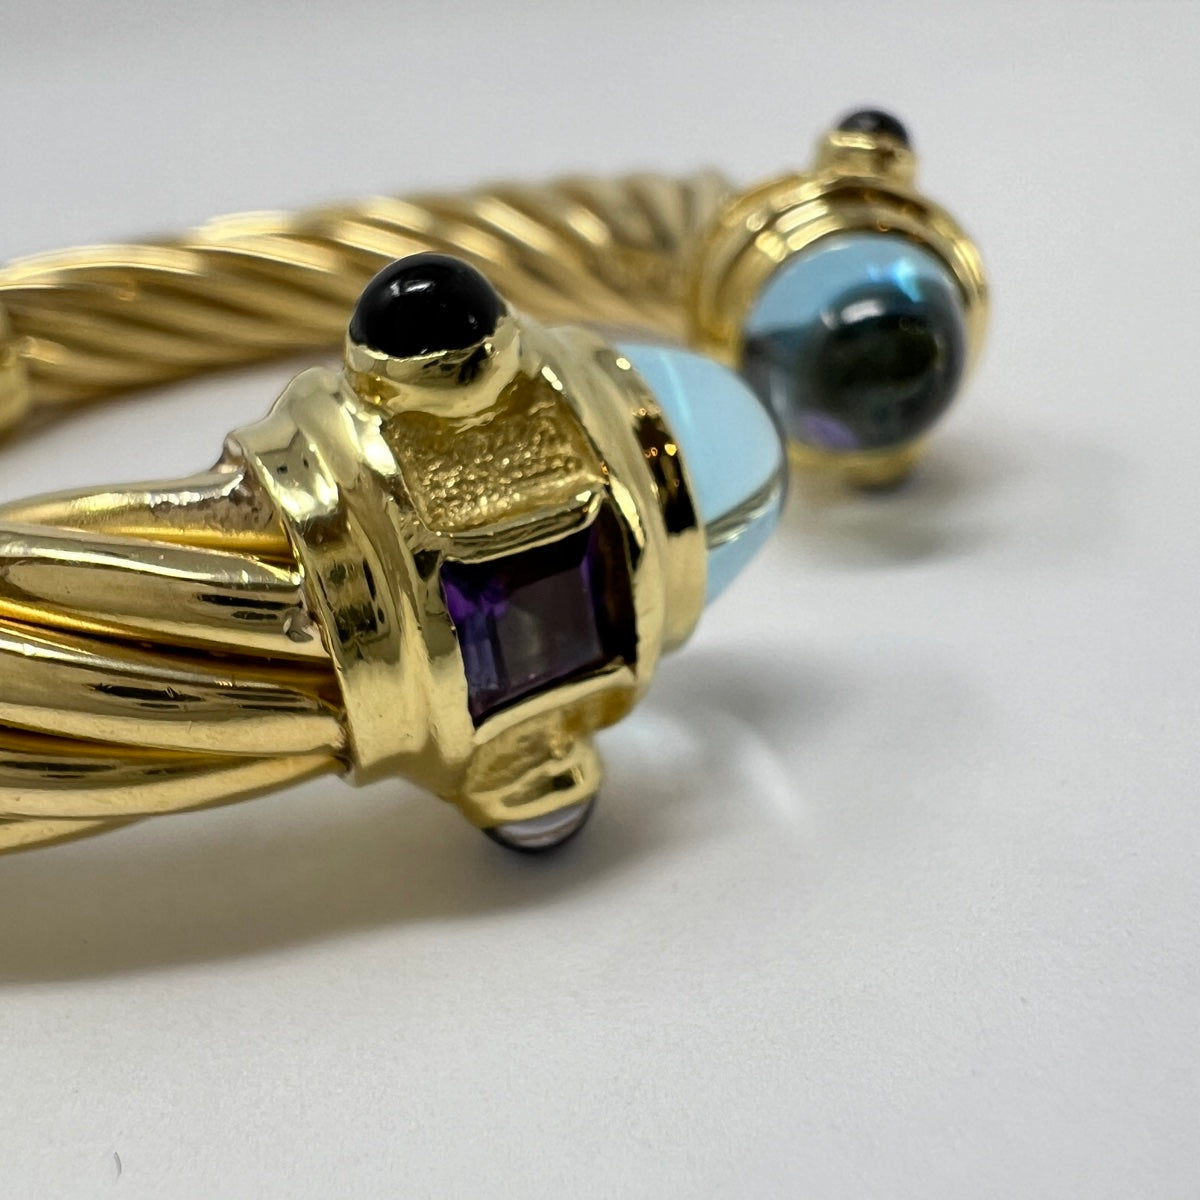 Cellini 18K Gold Cable Cuff Bracelet with Amethyst, Iolite and Topaz Caps